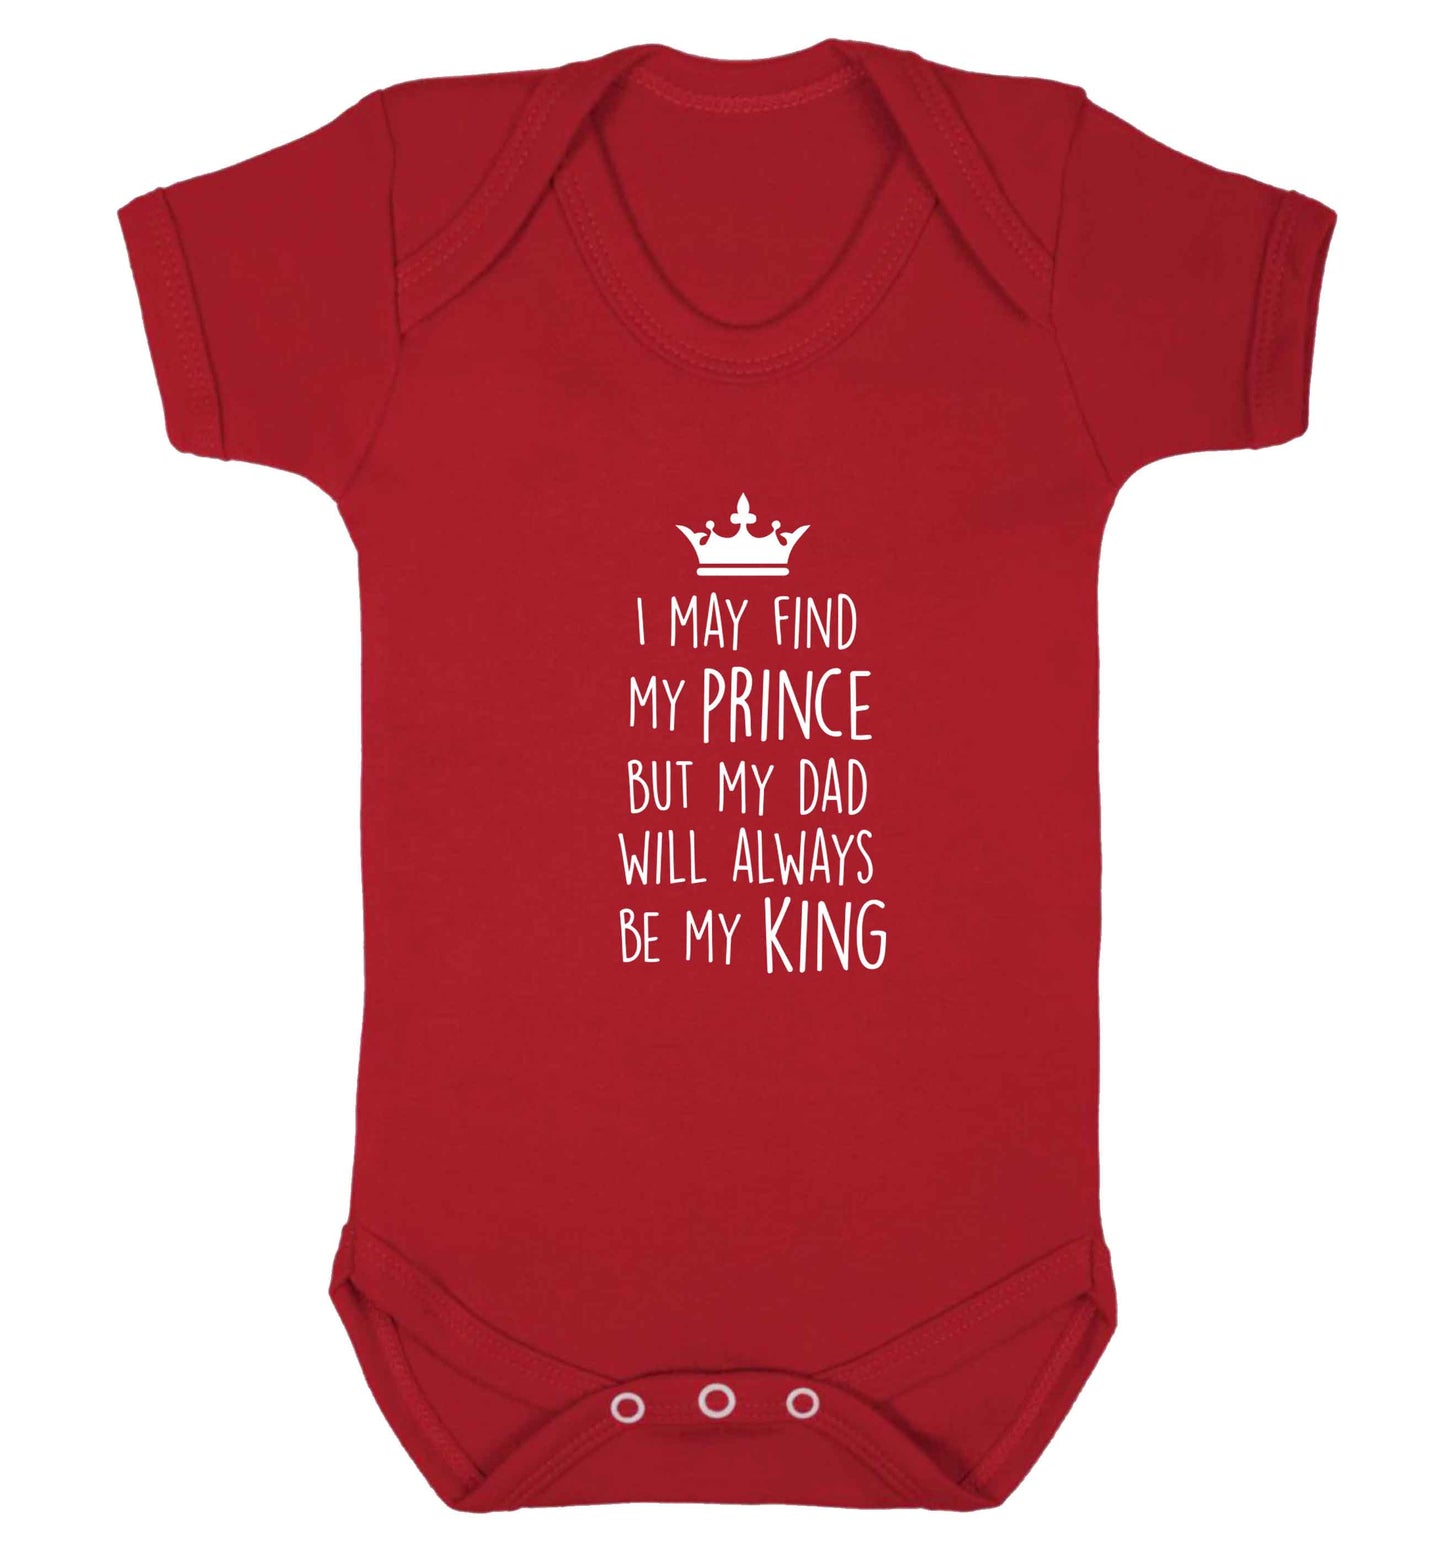 I may find my prince but my dad will always be my king baby vest red 18-24 months